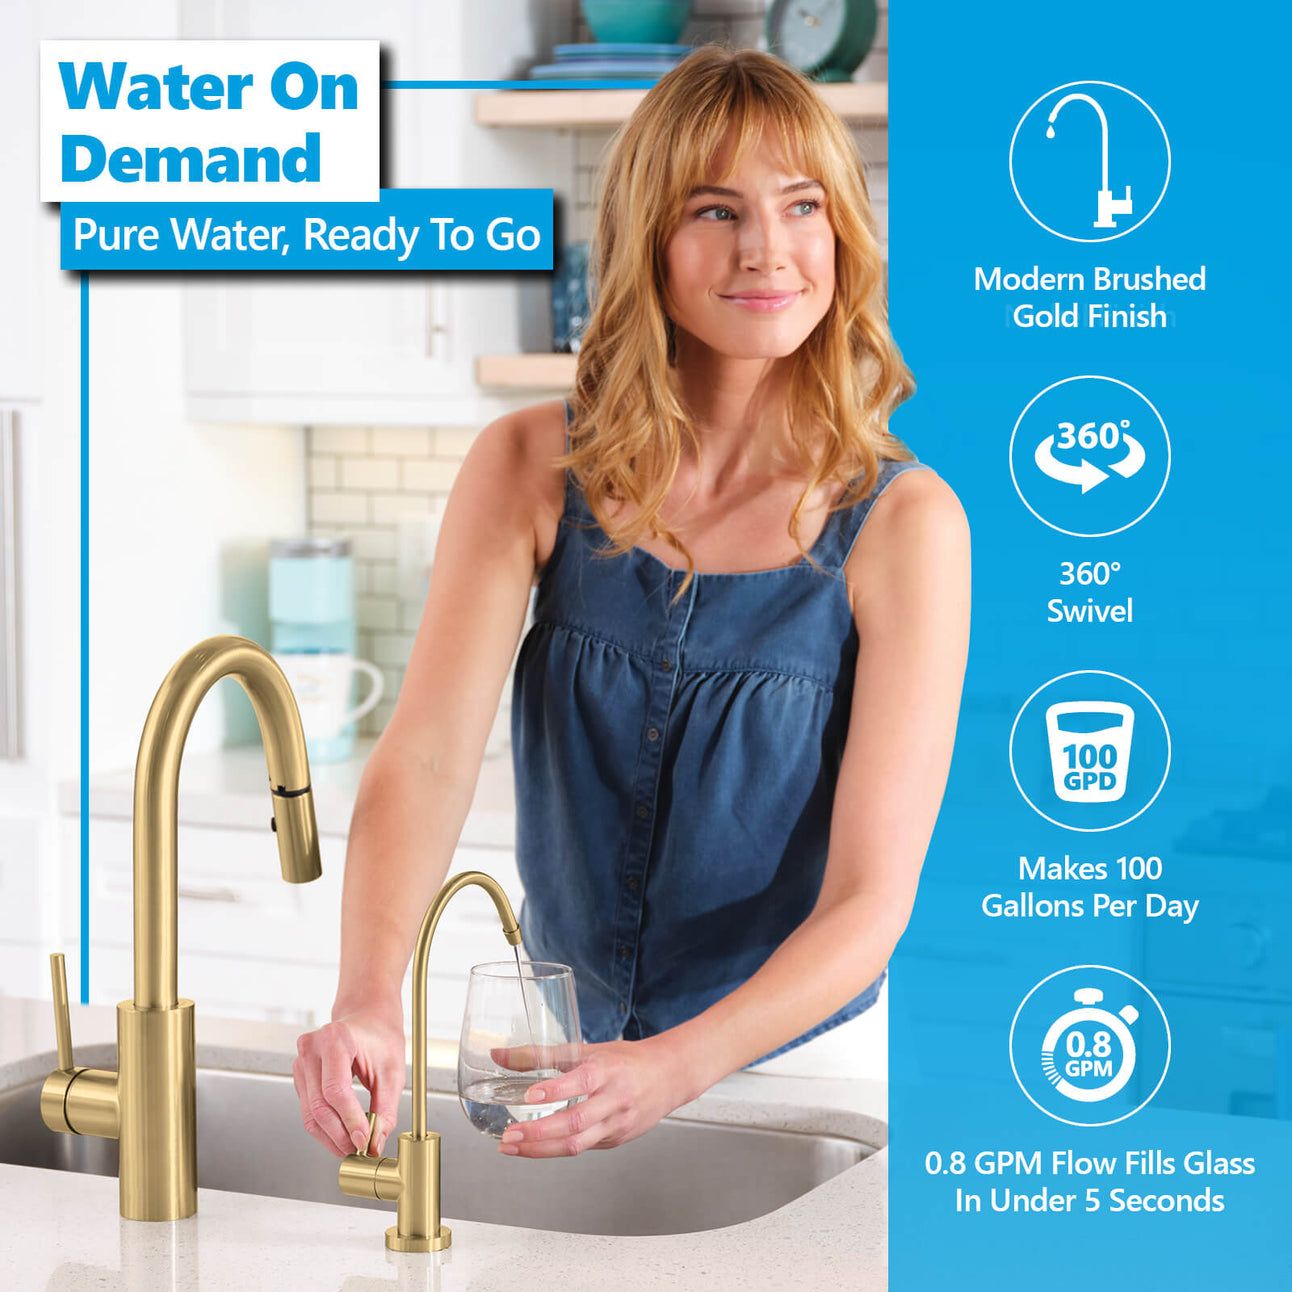 Alkaline & Ultraviolet RO System with modern brushed gold faucet